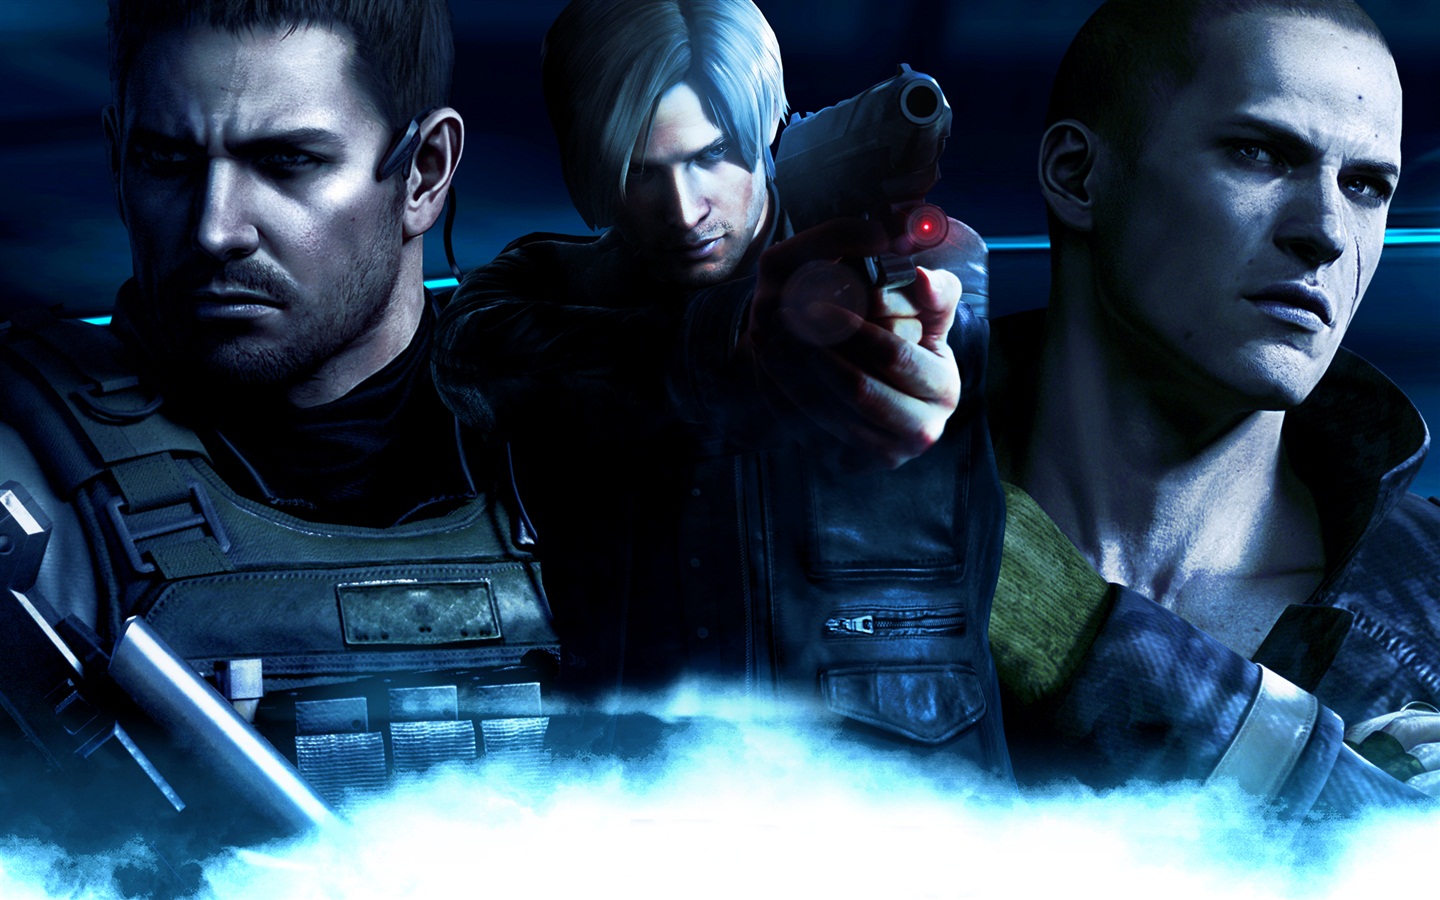 Resident Evil 6 HD game wallpapers #6 - 1440x900